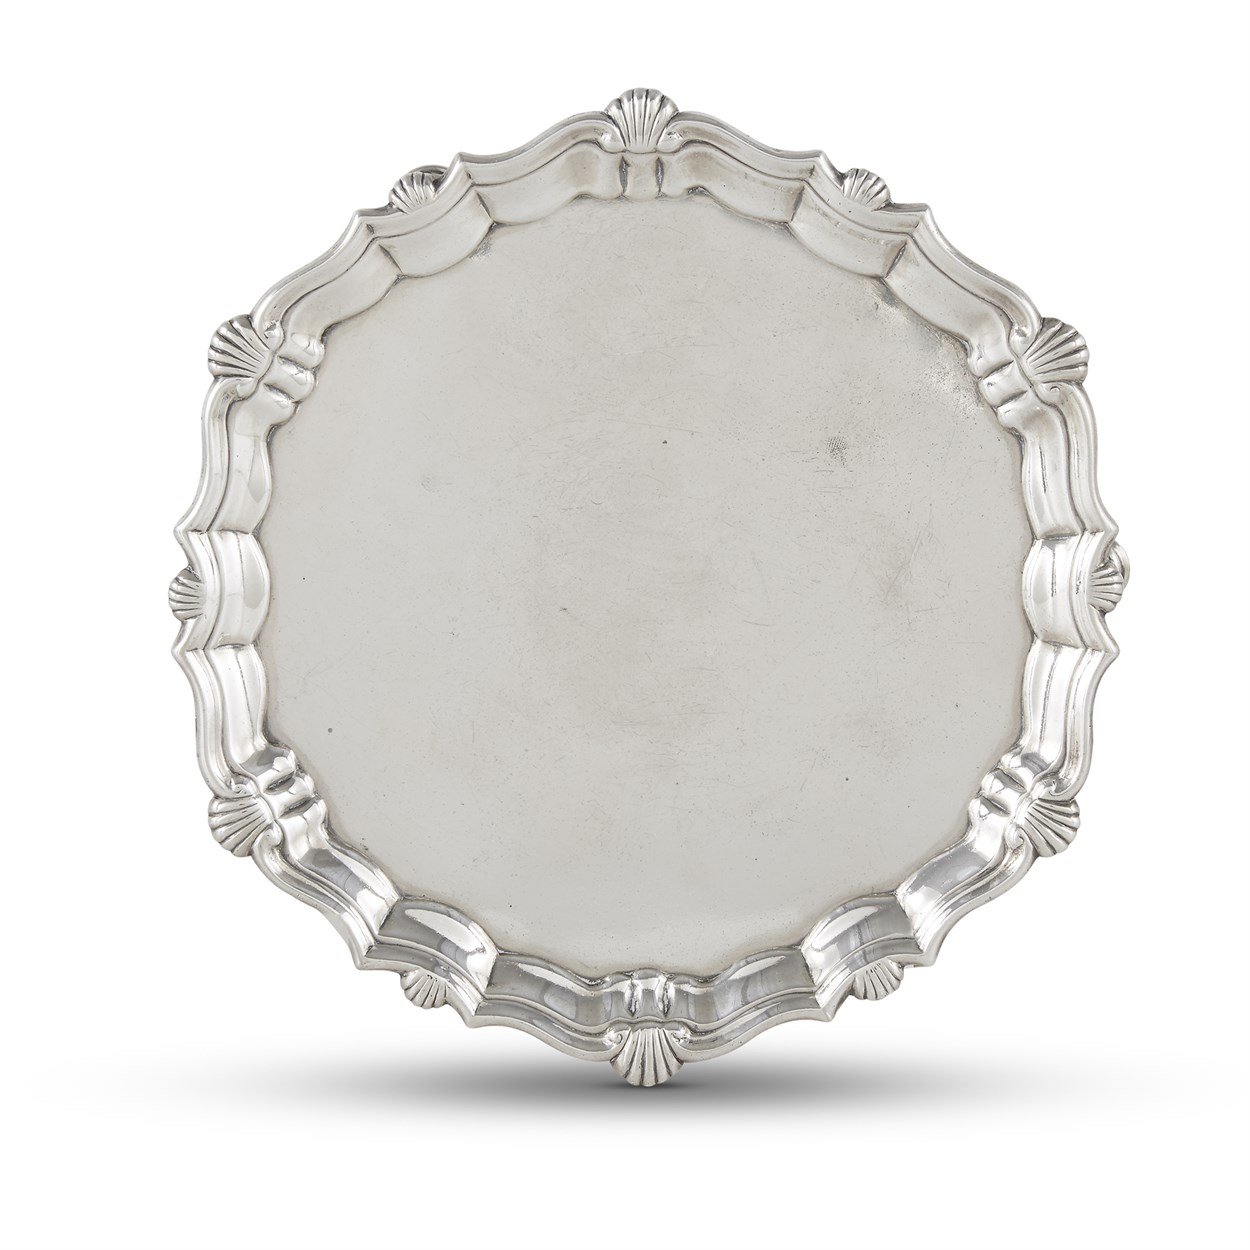 Lot 44 - A George II sterling silver footed salver